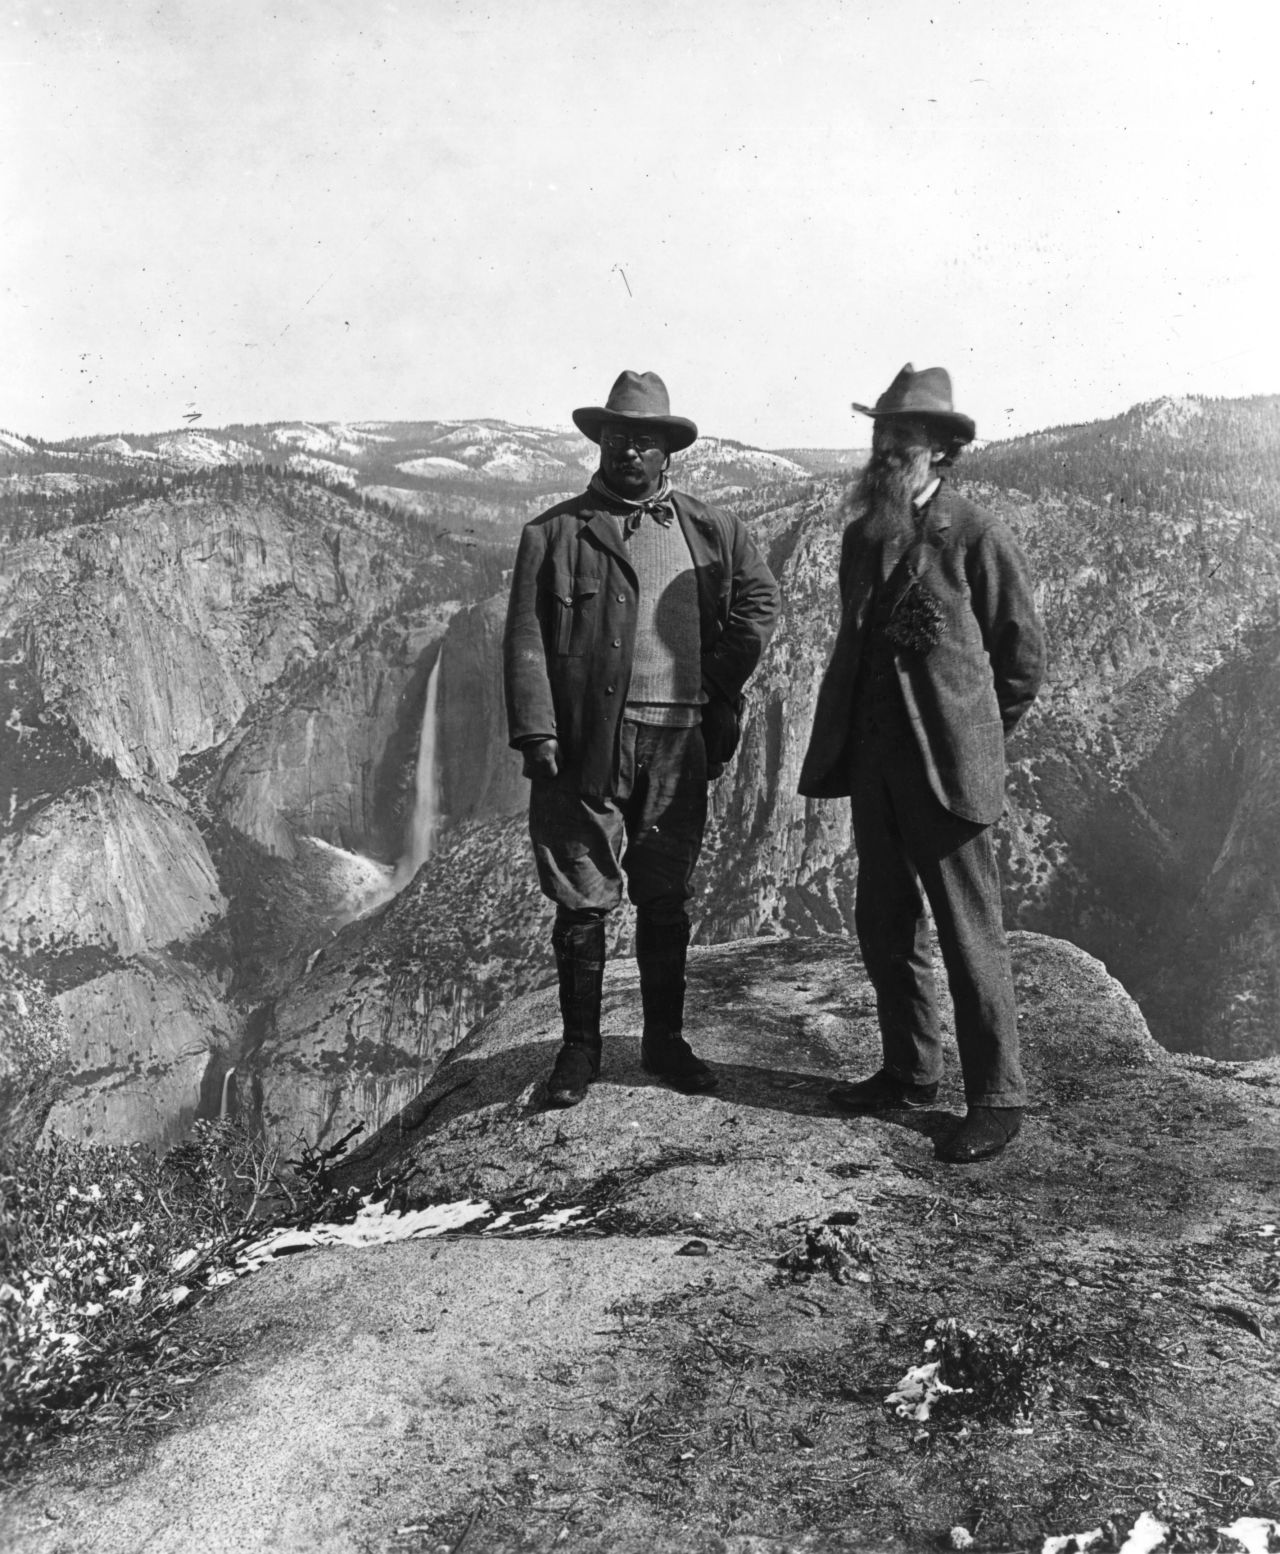 Theodore Roosevelt, left, poses with the conservationist John Muir on Glacier Point in Yosemite, California. Roosevelt was the first president to extensively preserve national forests and parks.